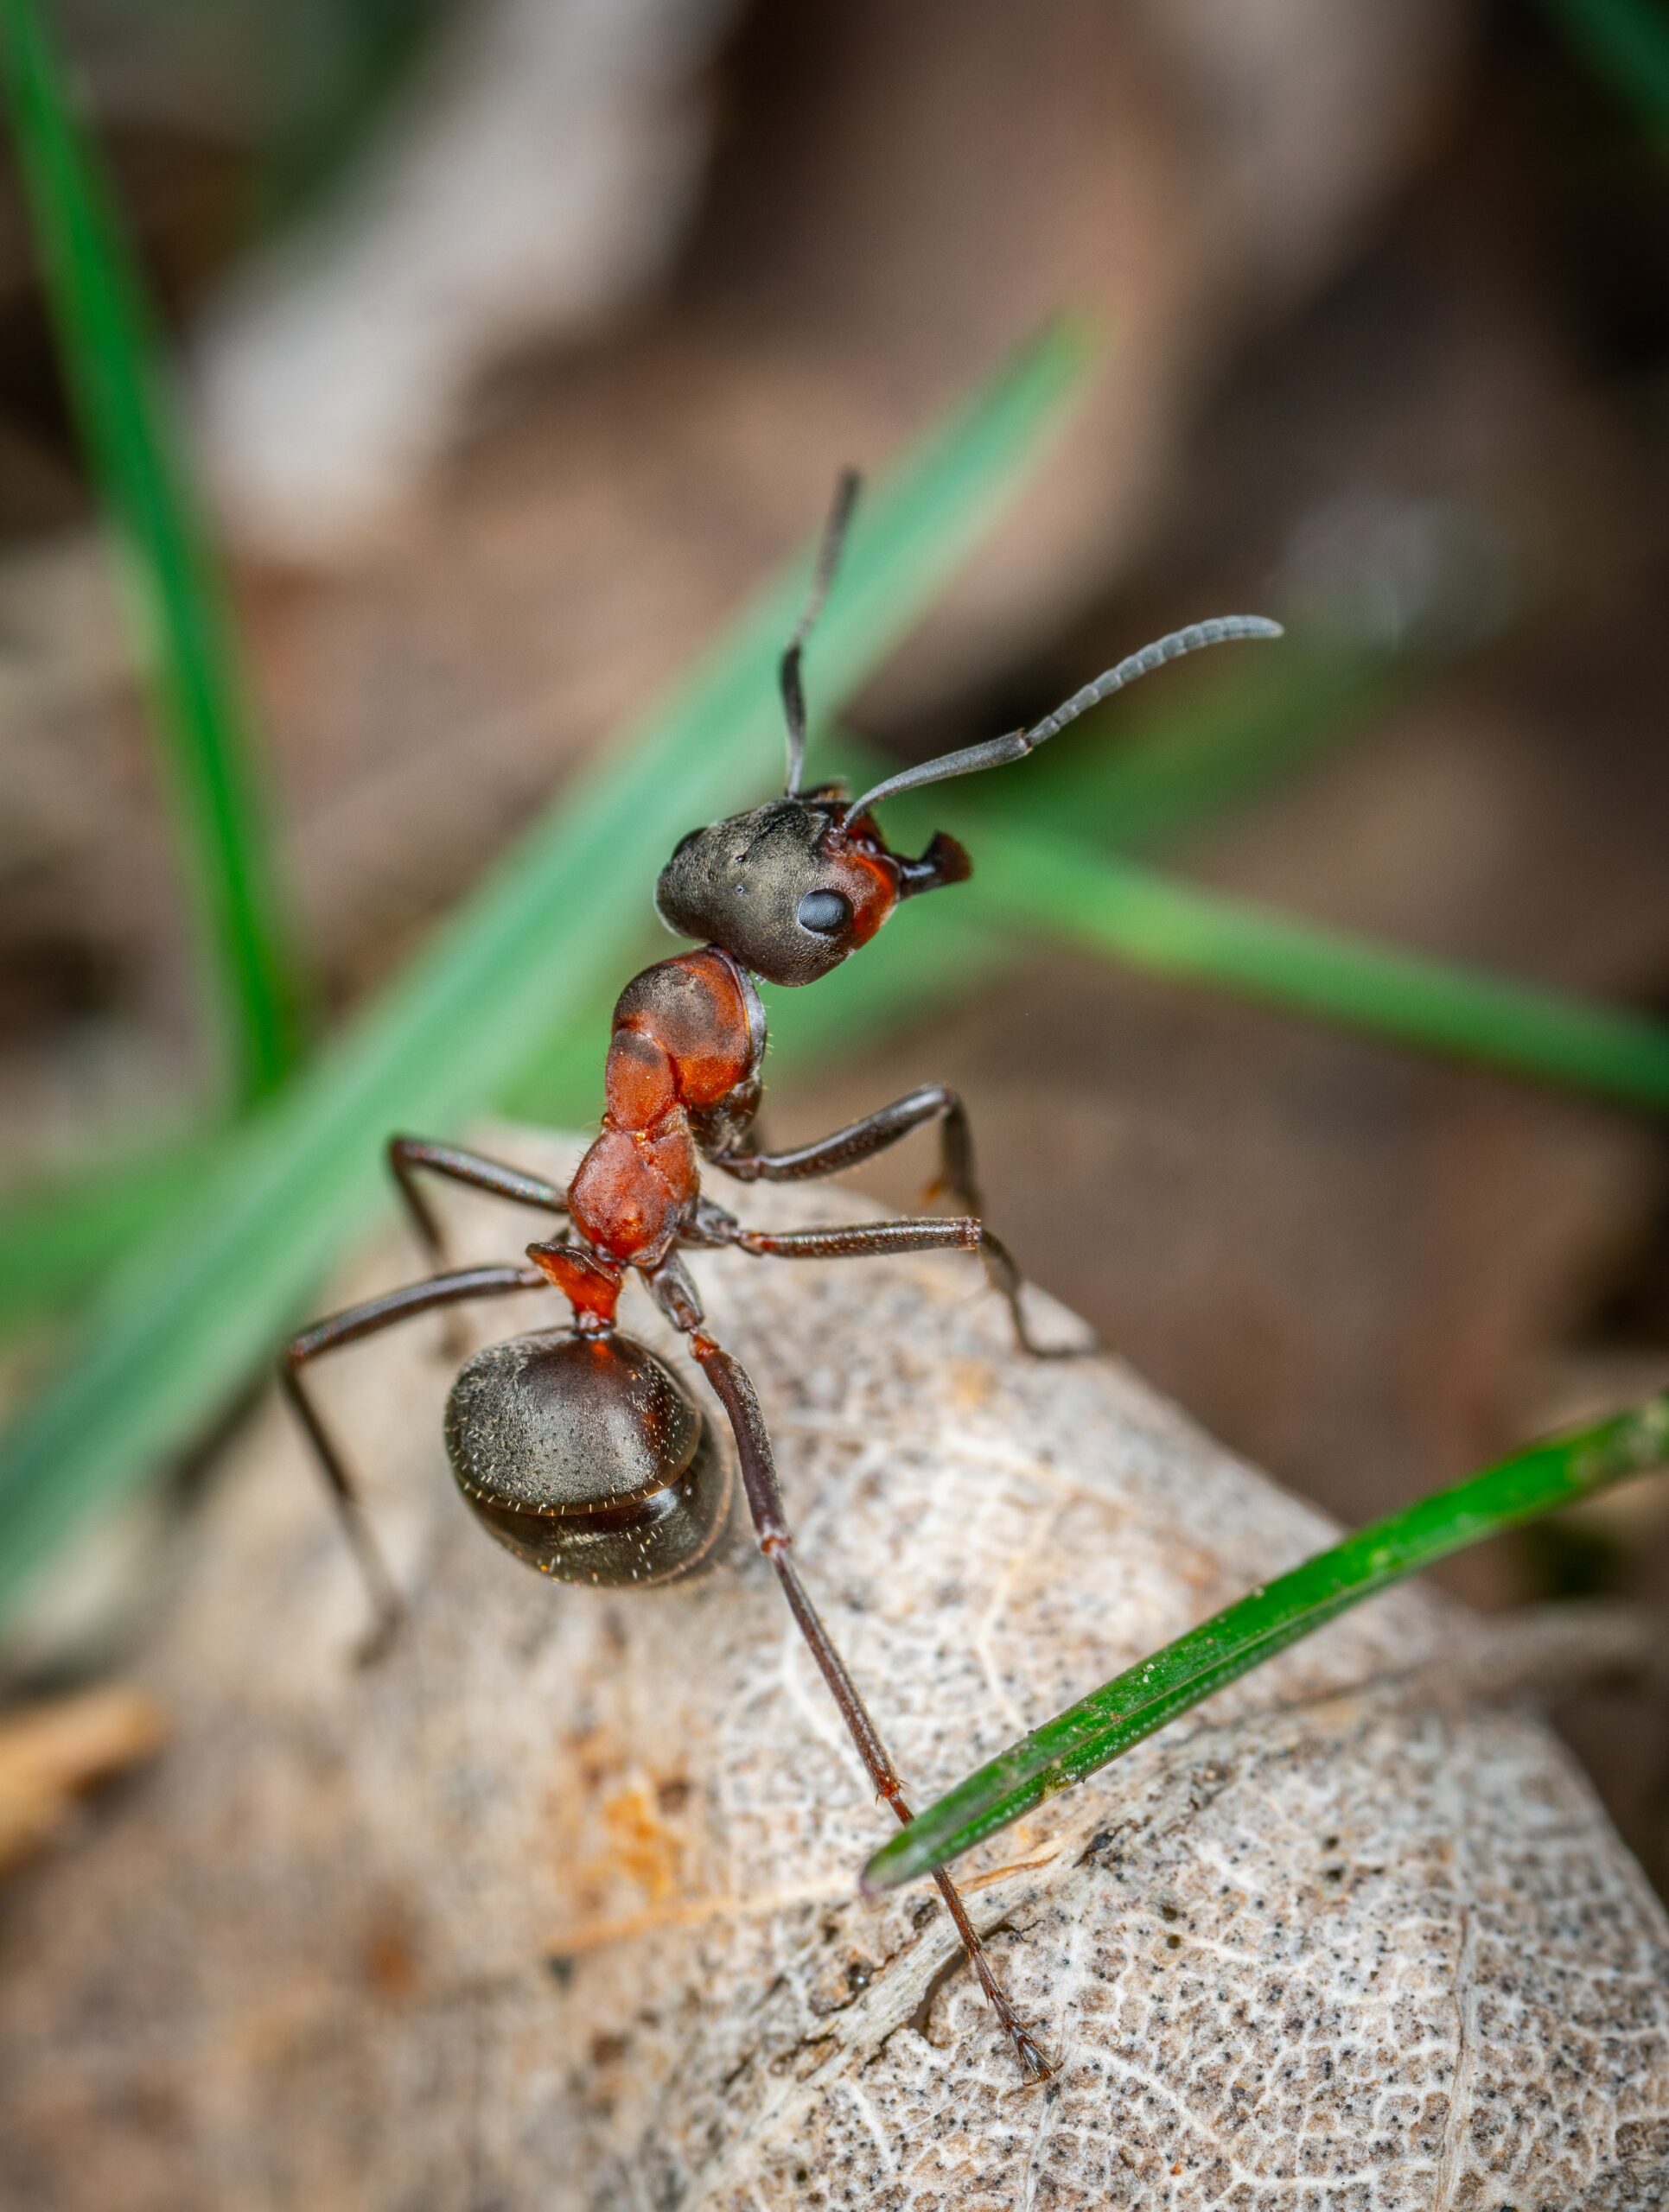 Troubleshooting fire ant problems by AgriLife’s Mario Villarino